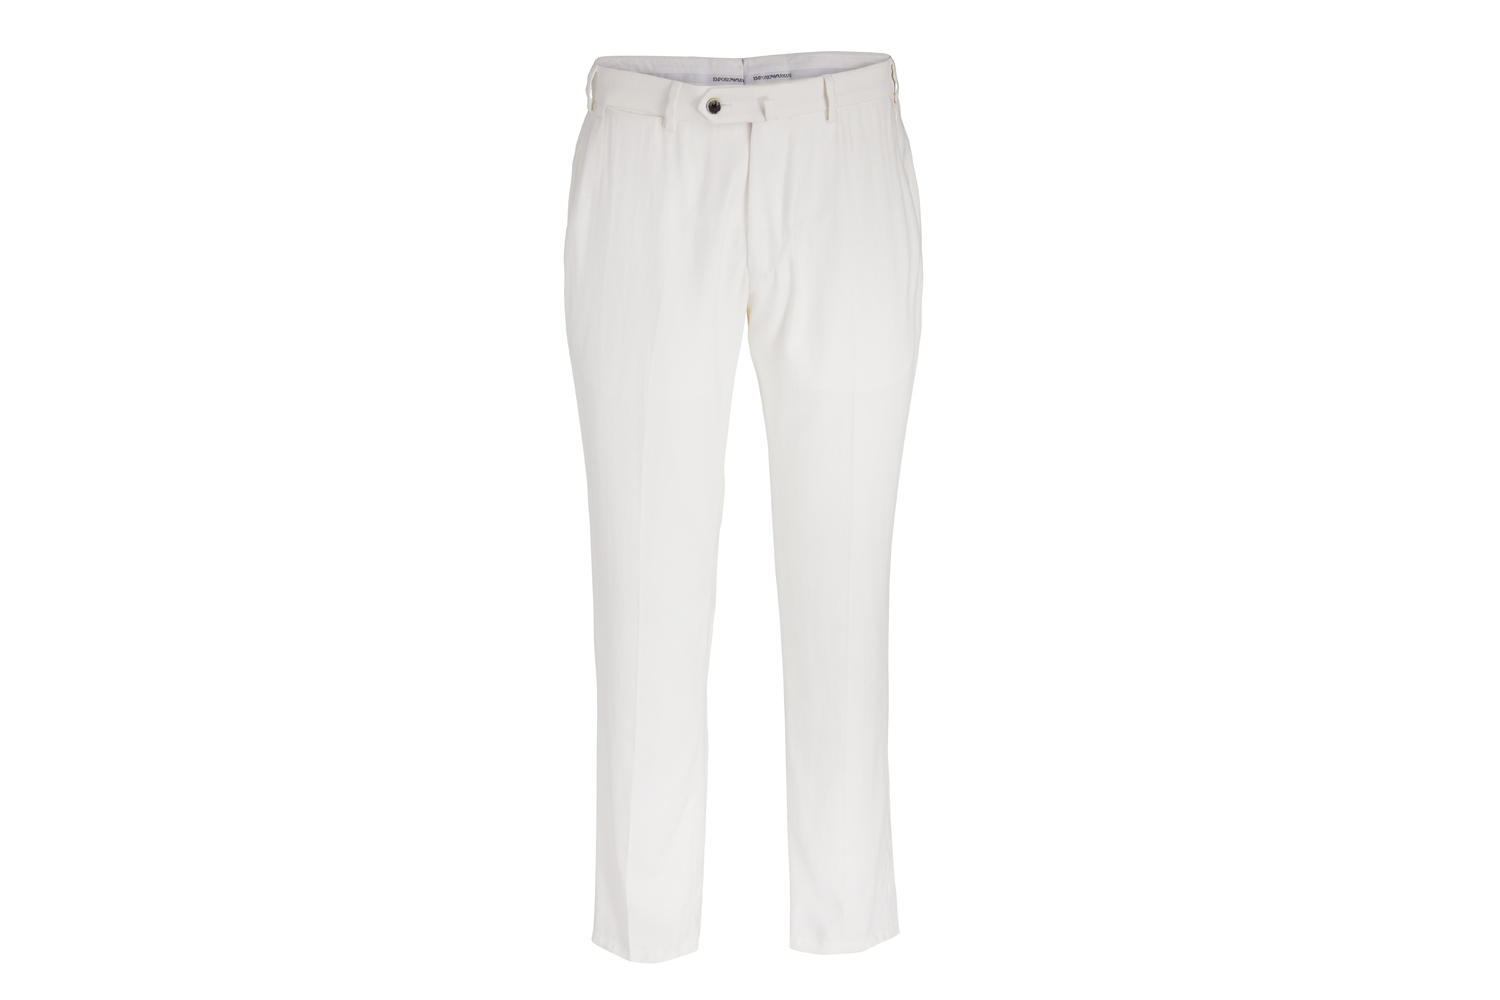 Flat-Front Solid-Weave Trousers
Emporio Armani